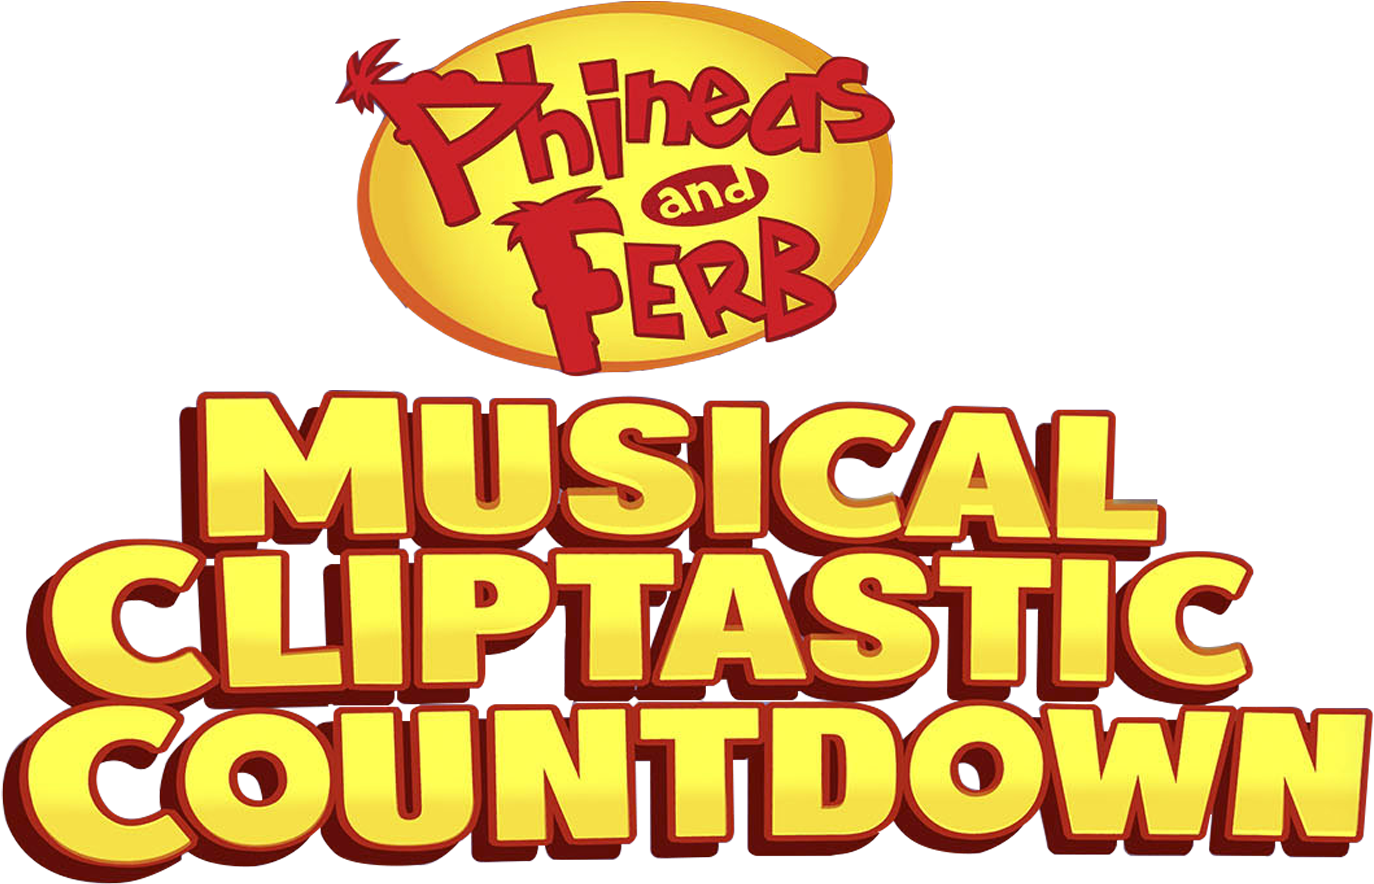 Phineas And Ferb Musical Cliptastic Countdown Hosted - Artists: Phineas & Ferb / Tv O.s.t. Cd (2048x1024)